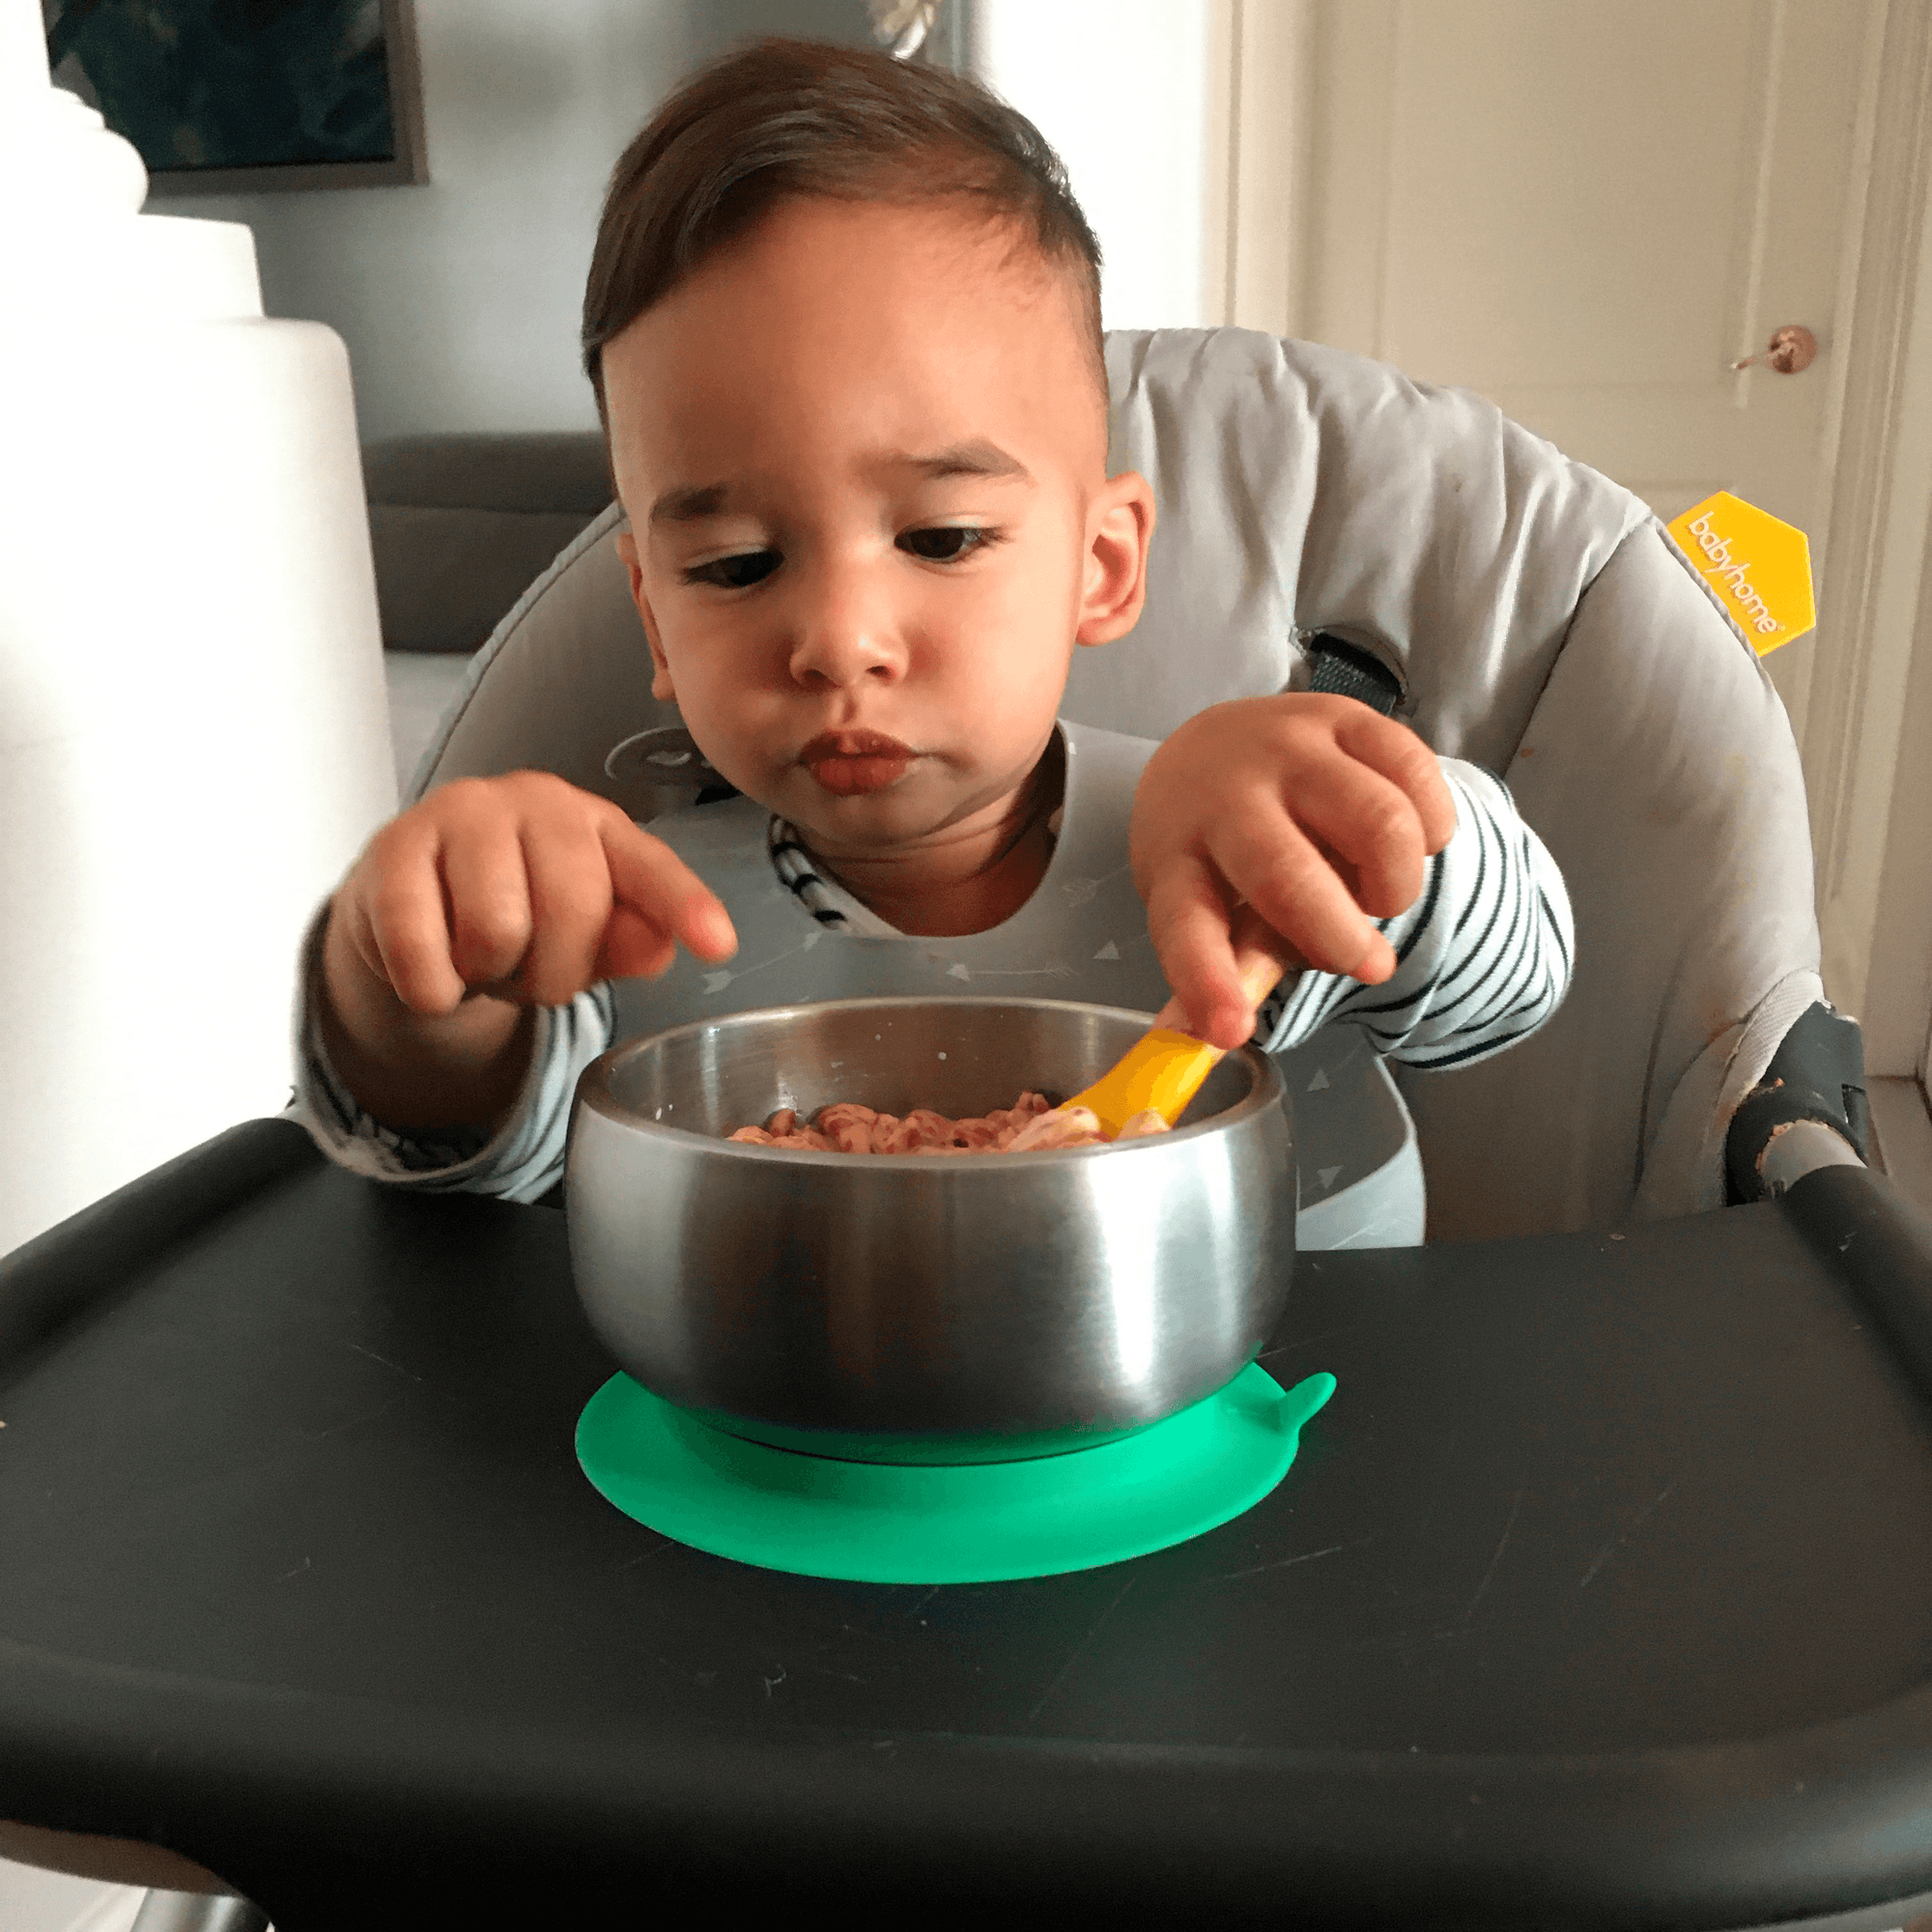 Creative Uses for Avanchy's Sustainable Snack Bowl with Lid. - Avanchy Sustainable Baby Dishware